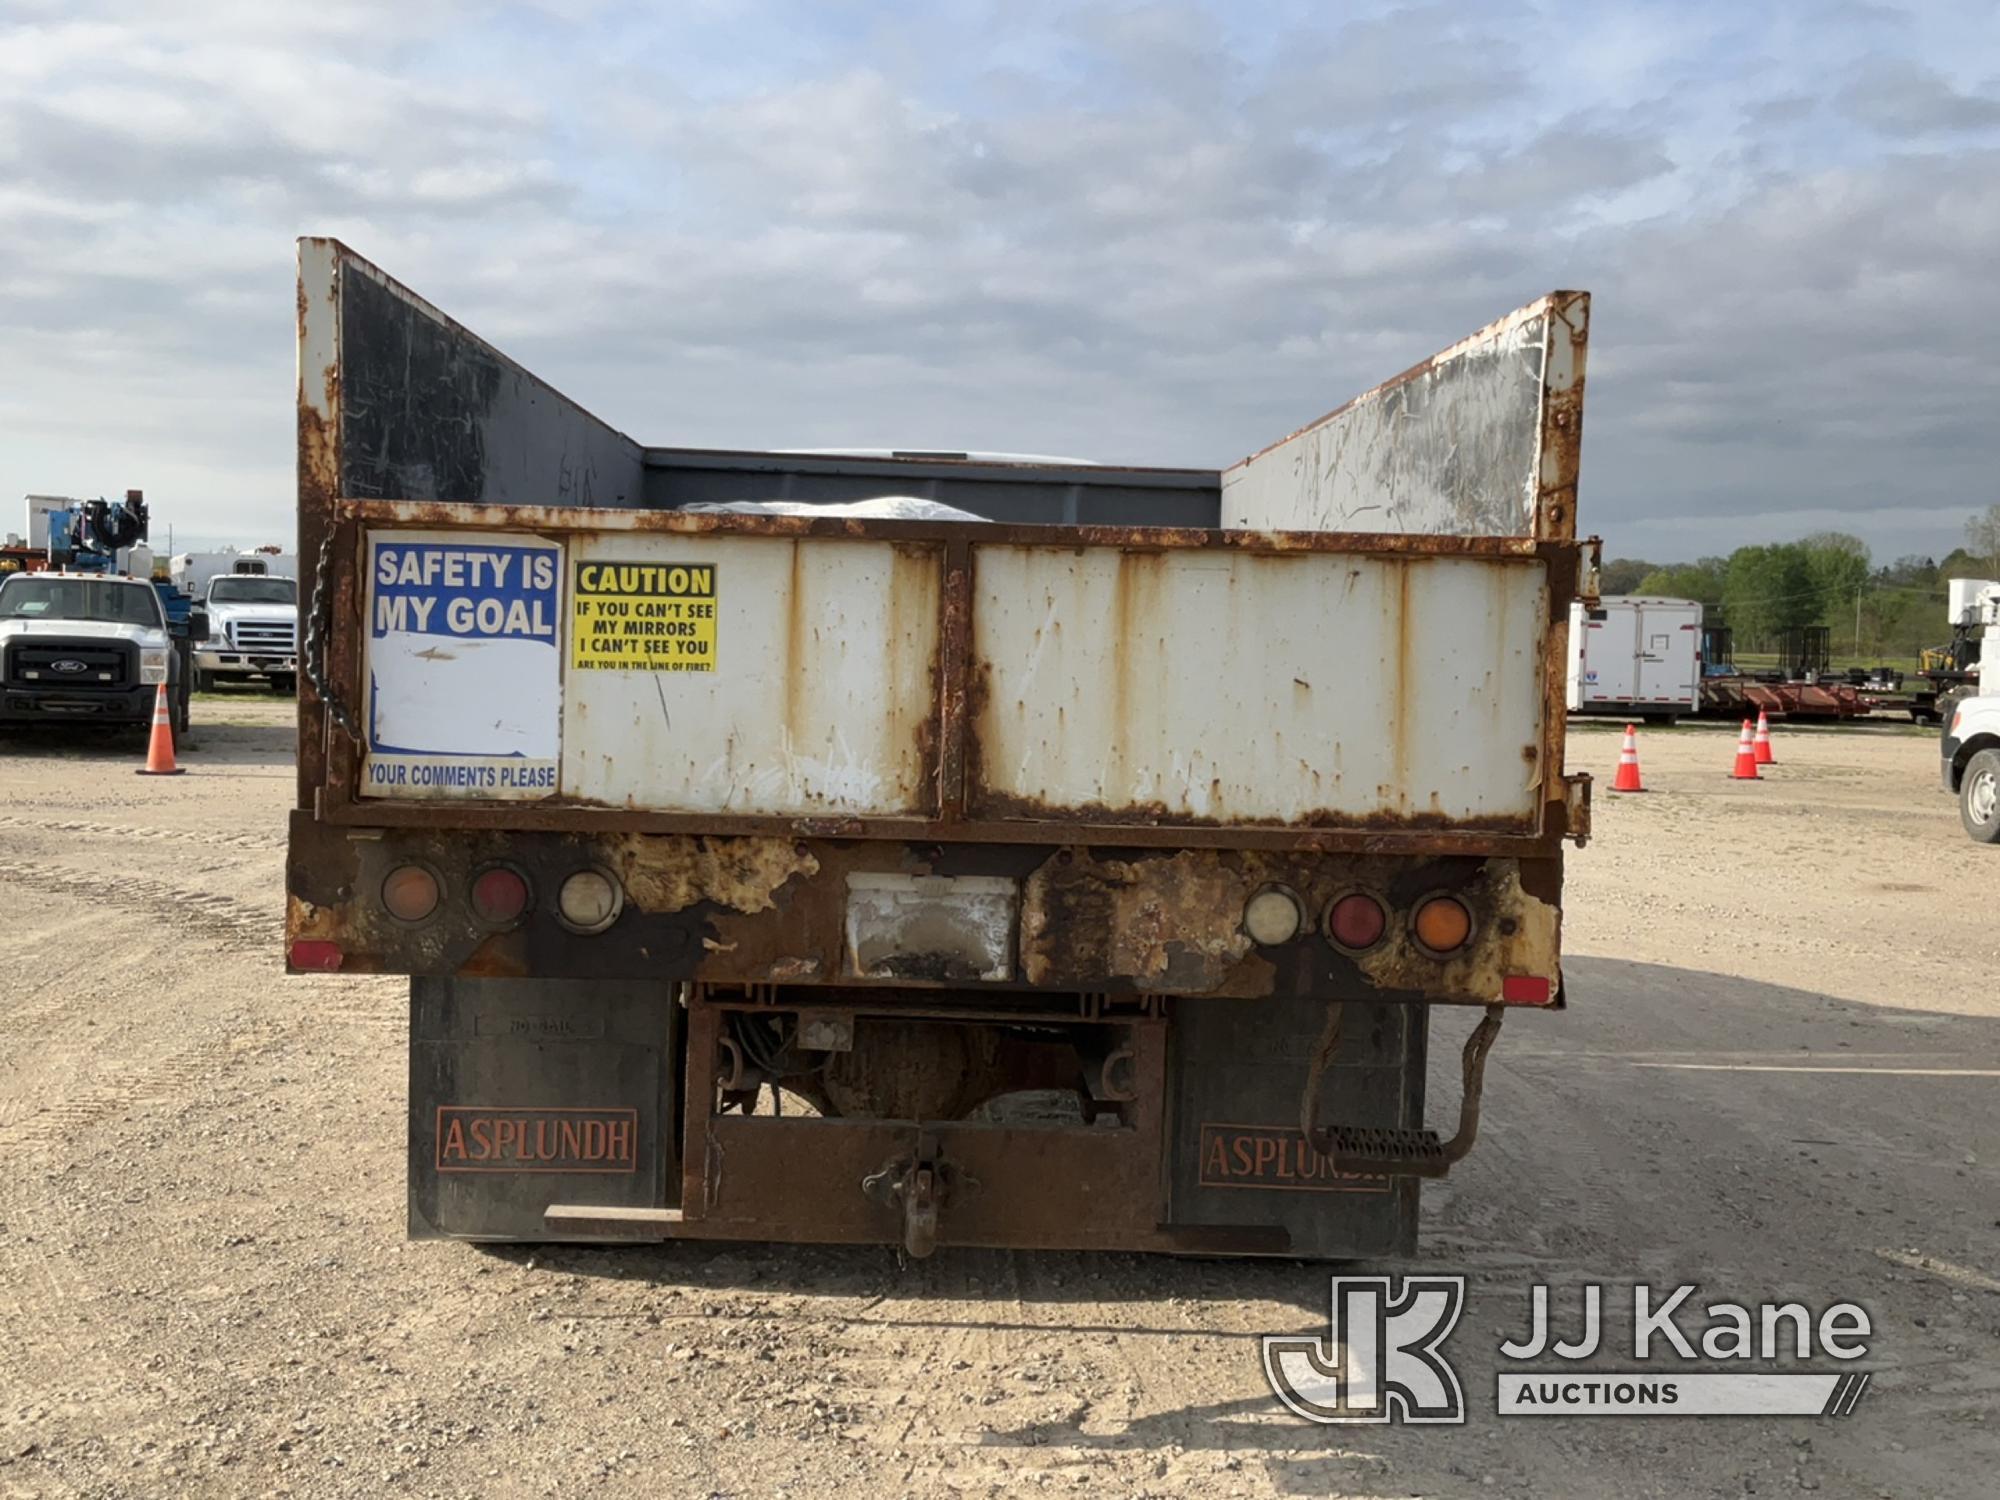 (Charlotte, MI) 2013 Ford F650 Chipper Dump Truck Runs, Moves, Jump To Start, PTO Engages, Dump Bed